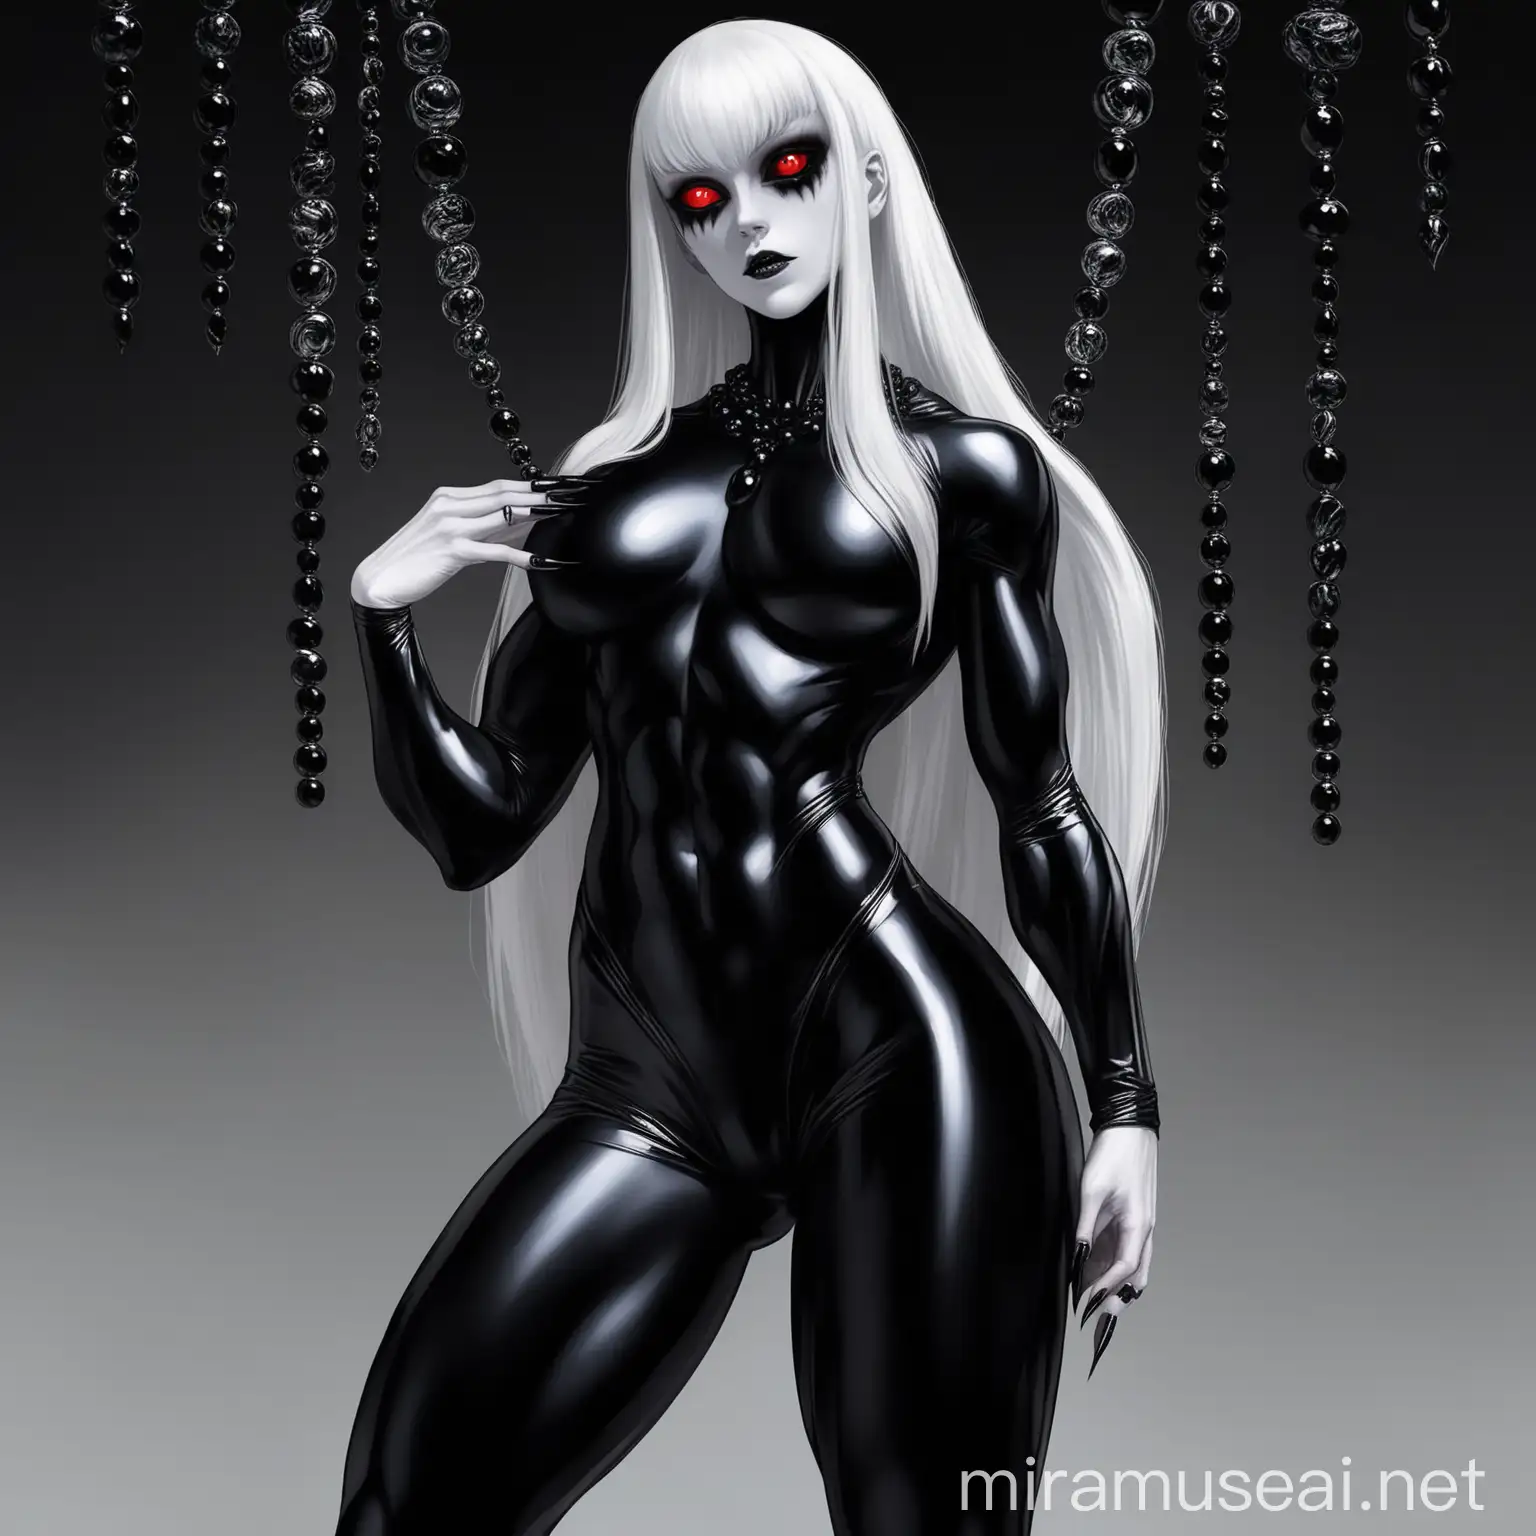 Tall Athletic Woman with White Skin and Obsidian Jewelry